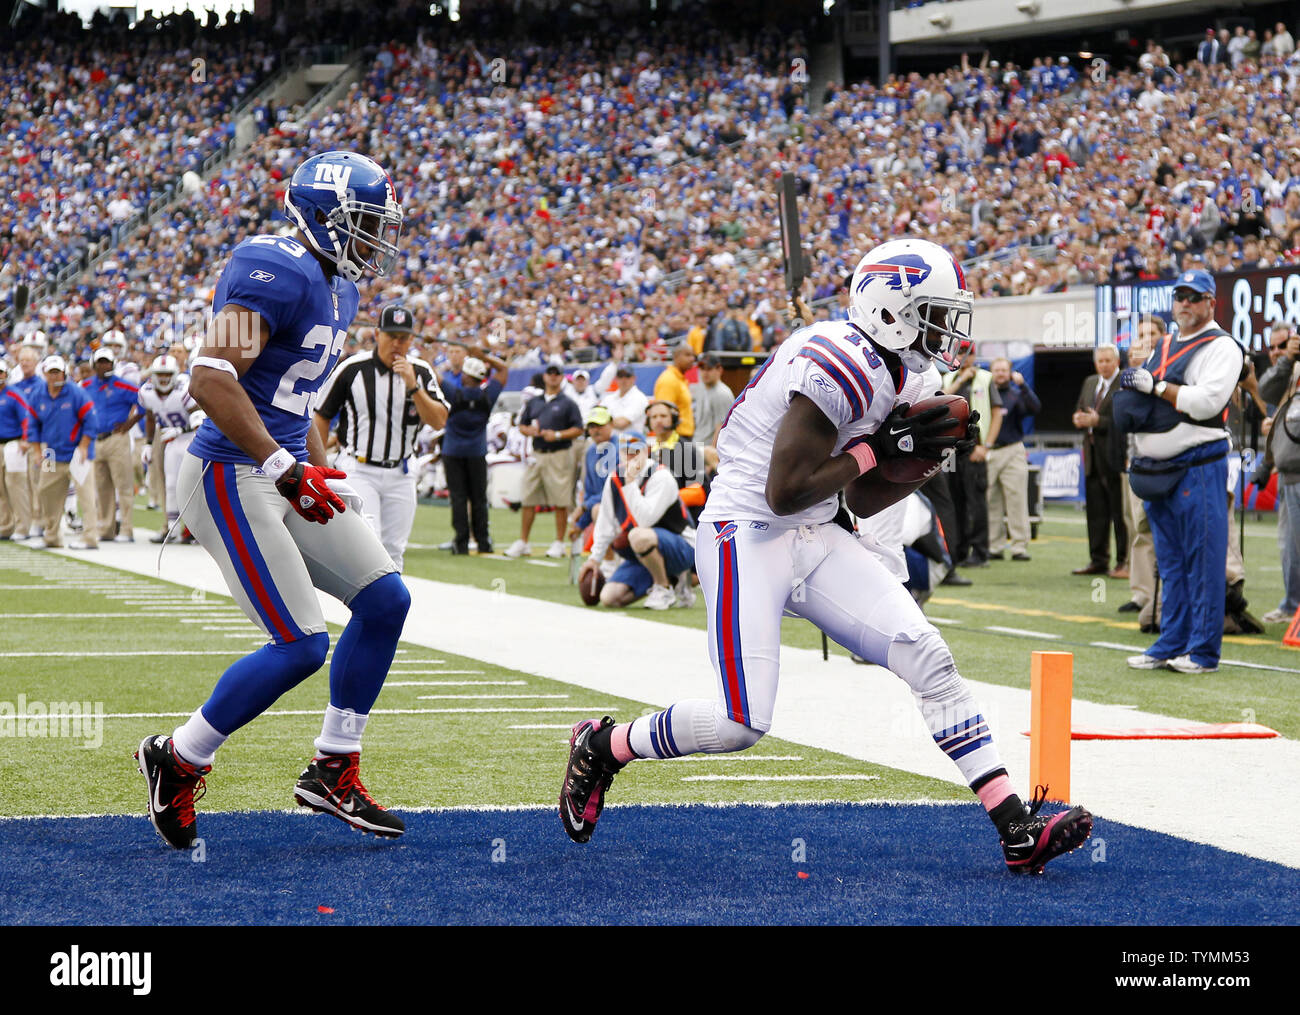 New York Giants Corey Webster watches Buffalo Bills Stevie Johnson score a  9 yard touchdown in the fourth quarter in week 6 of the NFL season at  MetLife Stadium in East Rutherford,